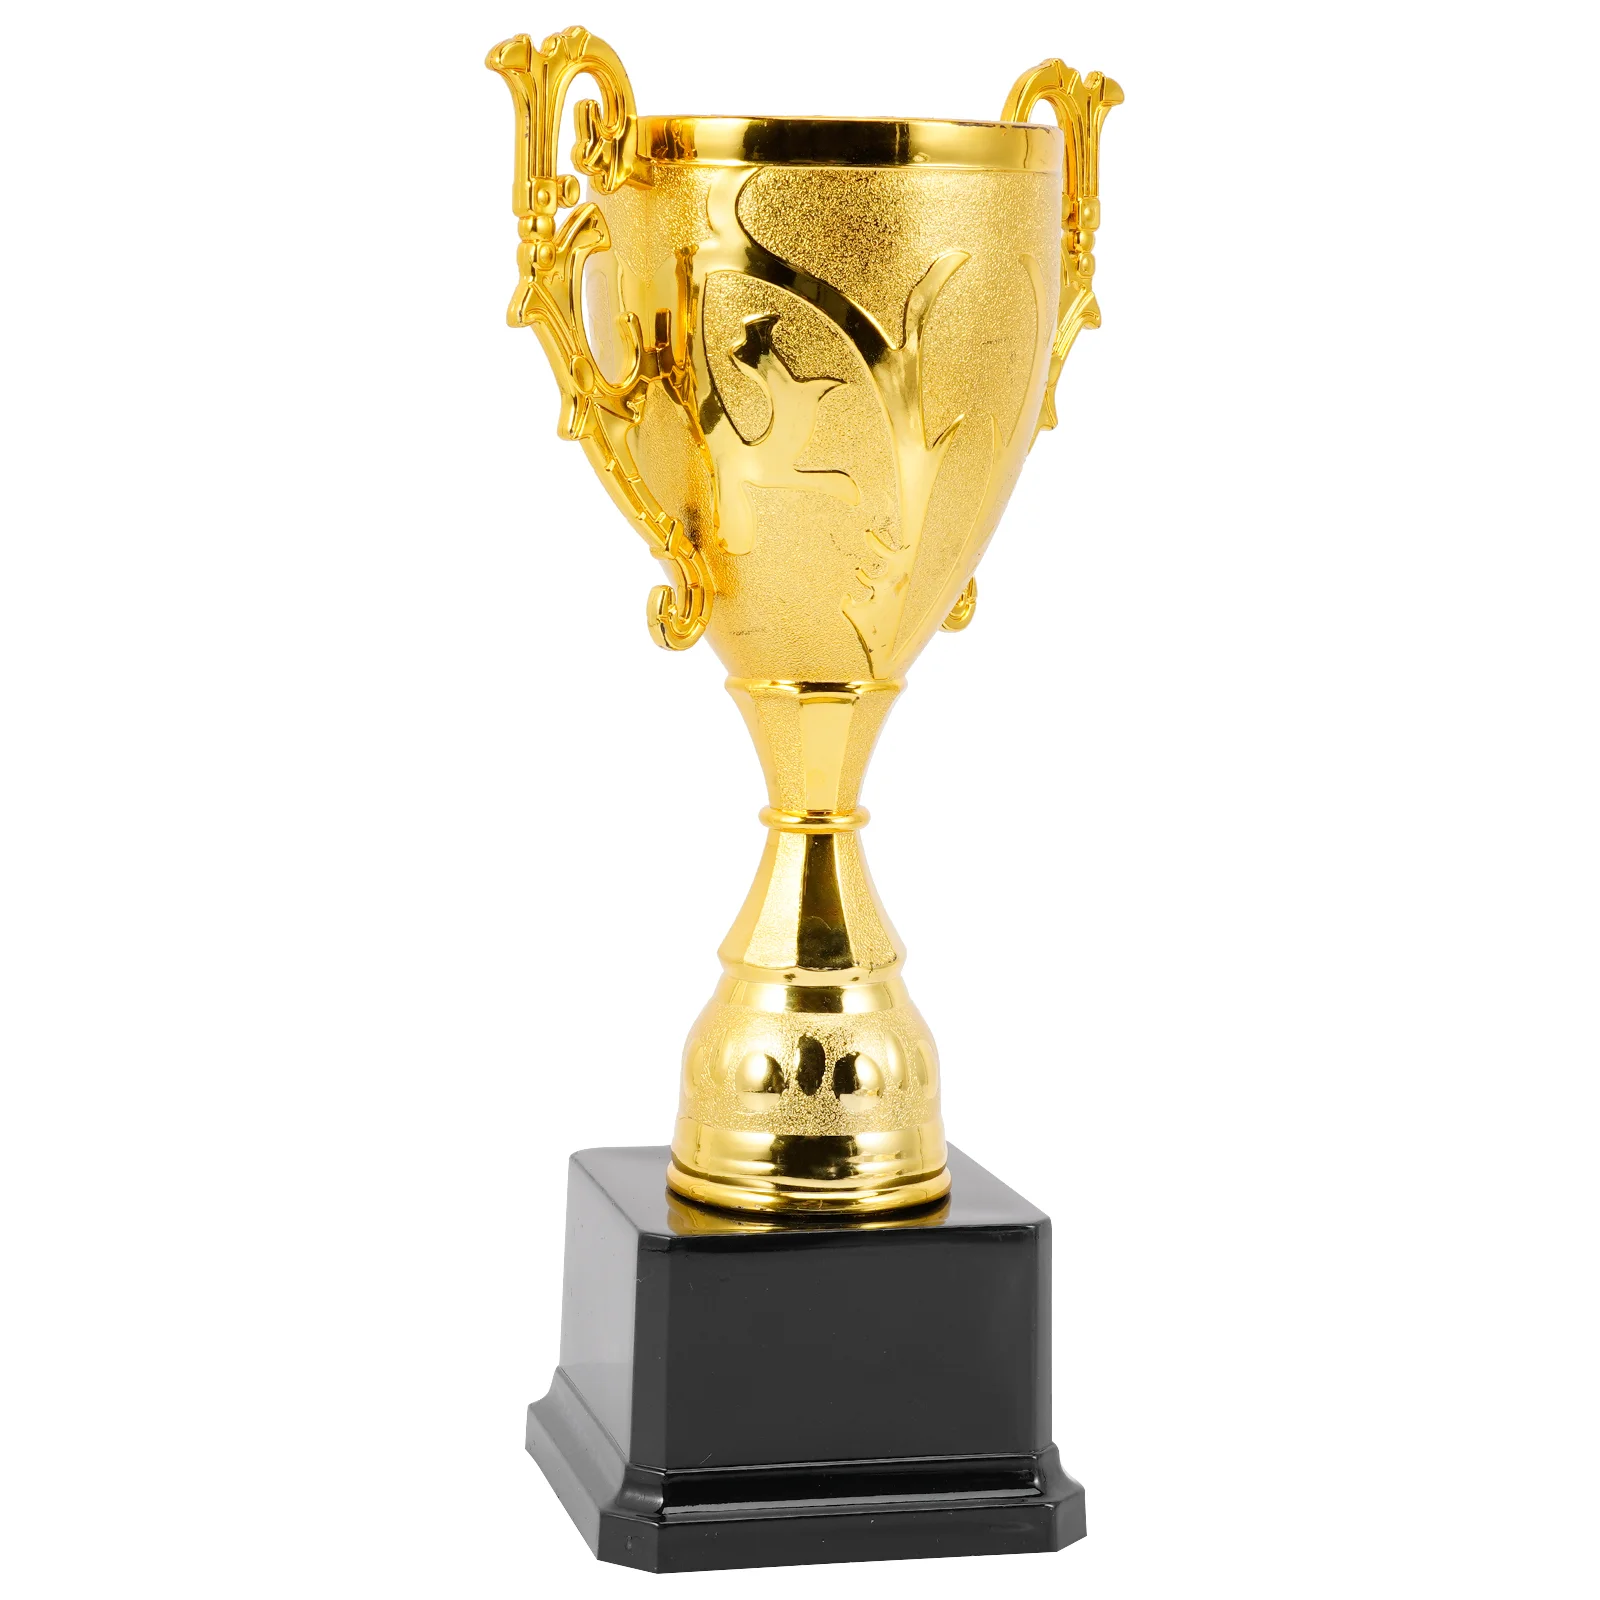 

Trophy Reward Prizes School Winning Award Wellies Kids Party Favors Trophies Football Stuff Small Game Awards Soccer